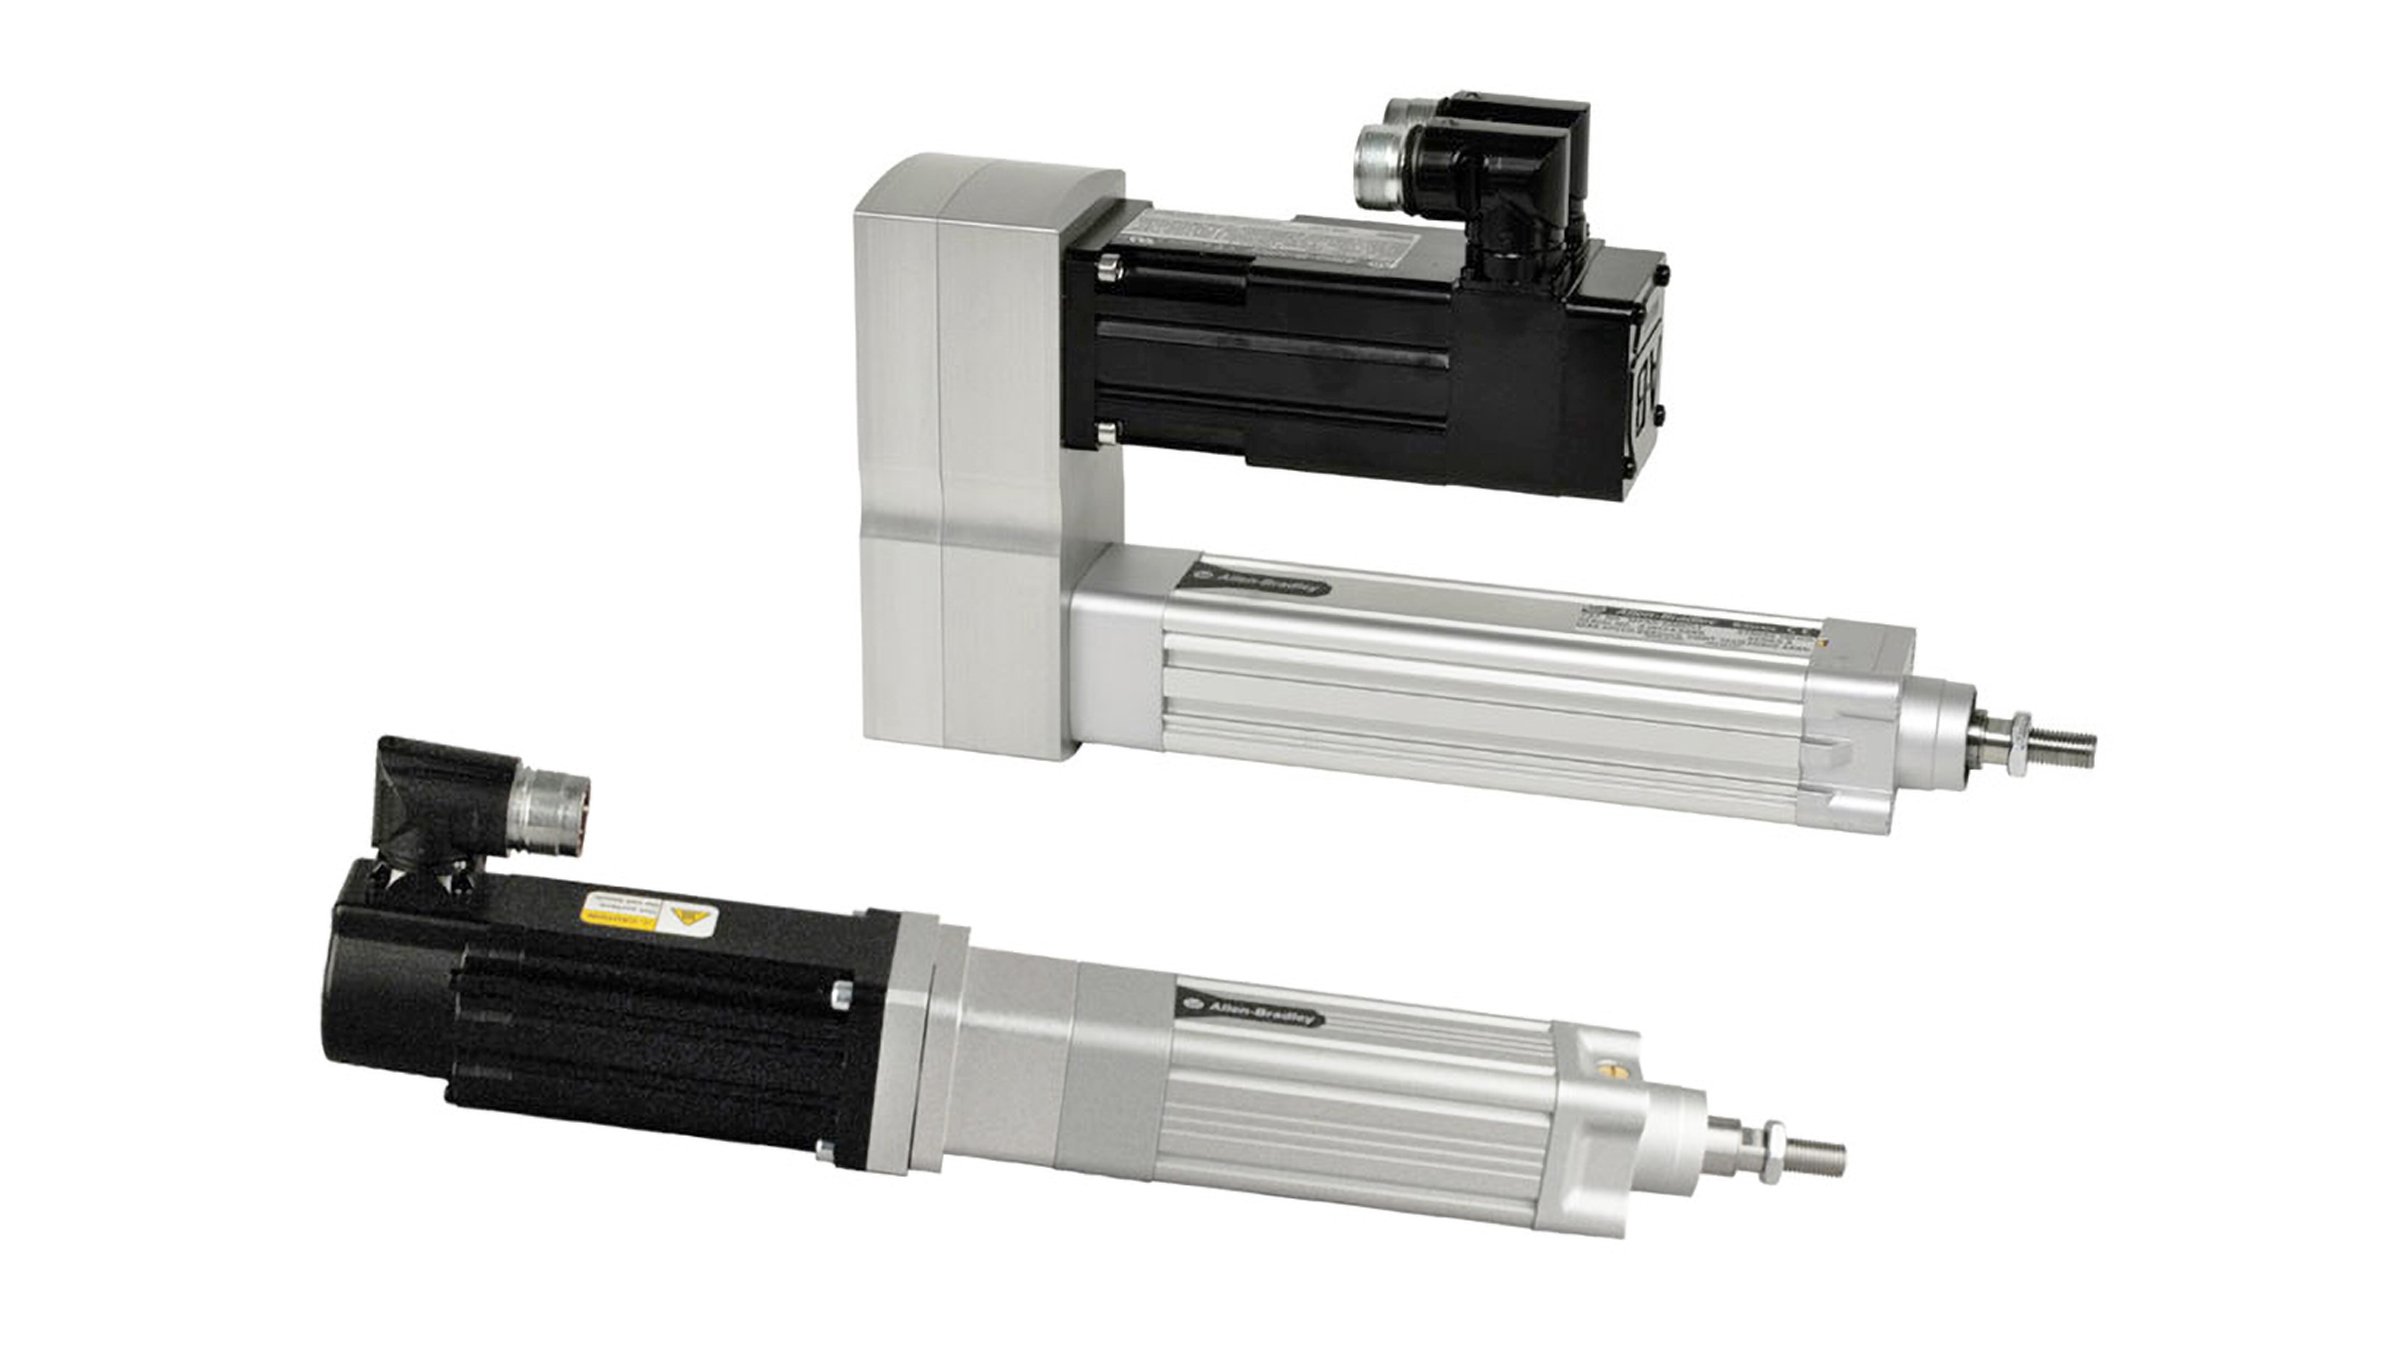 Allen-Bradley Bulletin VPAR and MPAR electric cylinders provide an integrated solution with dynamic, precise response for a wide range of linear motion applications.